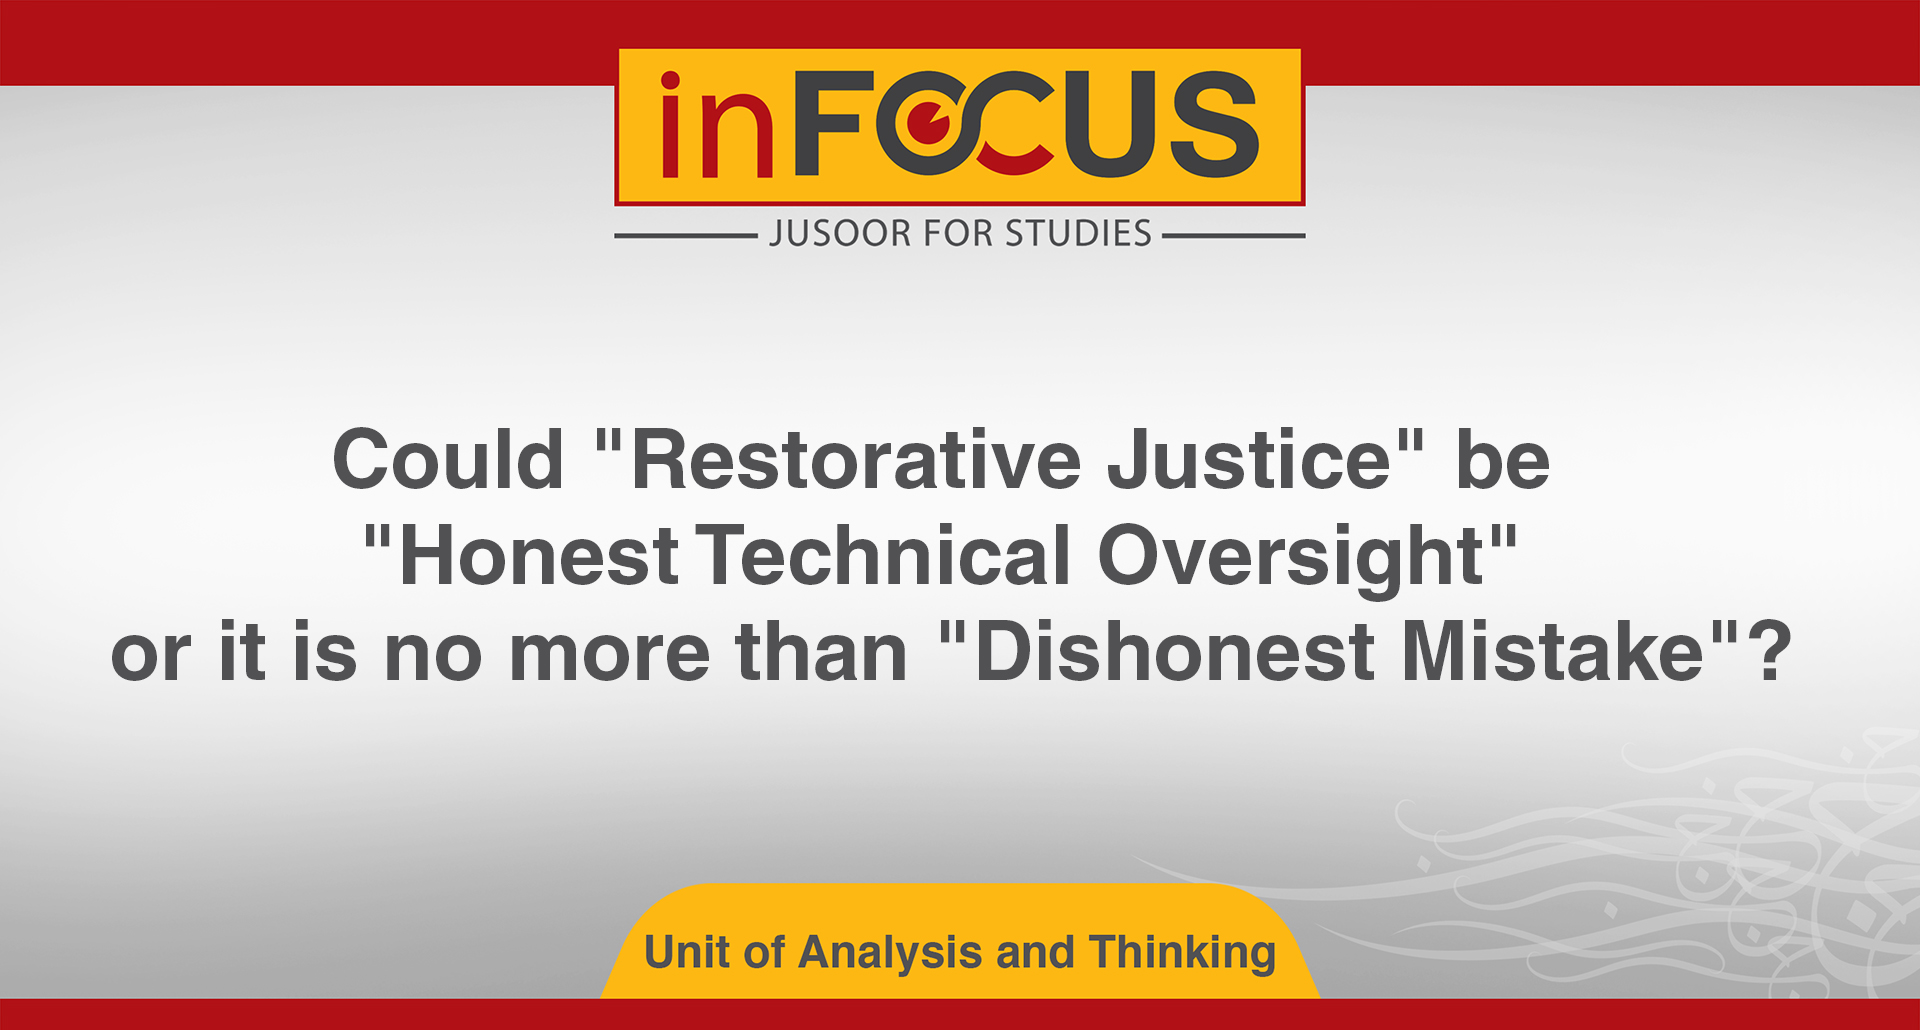 Could "Restorative Justice" be "Honest Technical Oversight" or it is no more than "Dishonest Mistake"?